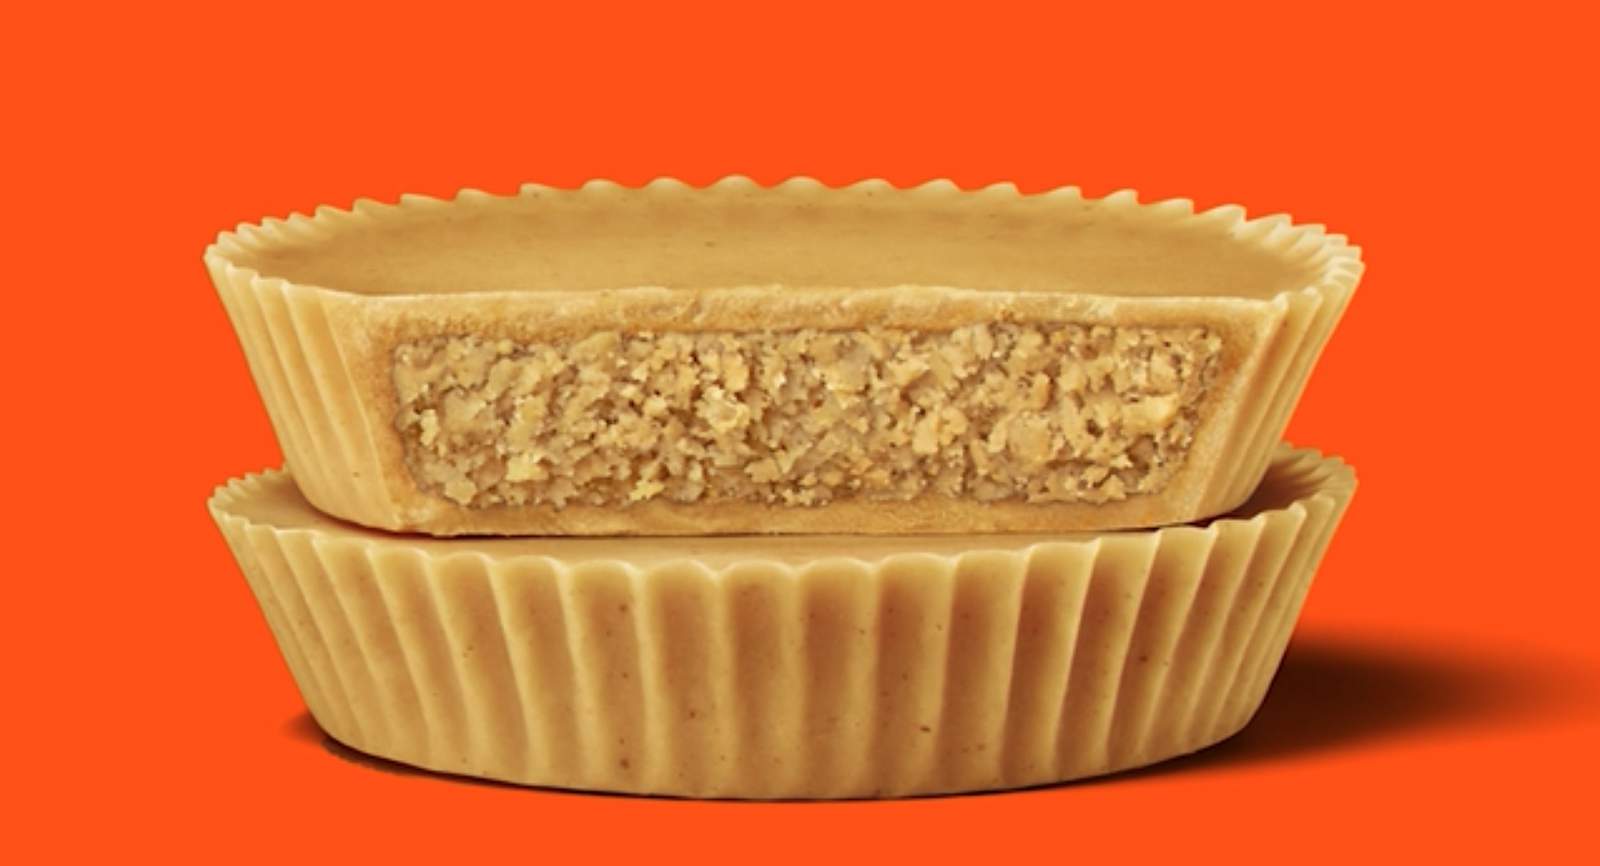 Bye-bye chocolate: Reese’s launches Peanut Butter Lovers cups